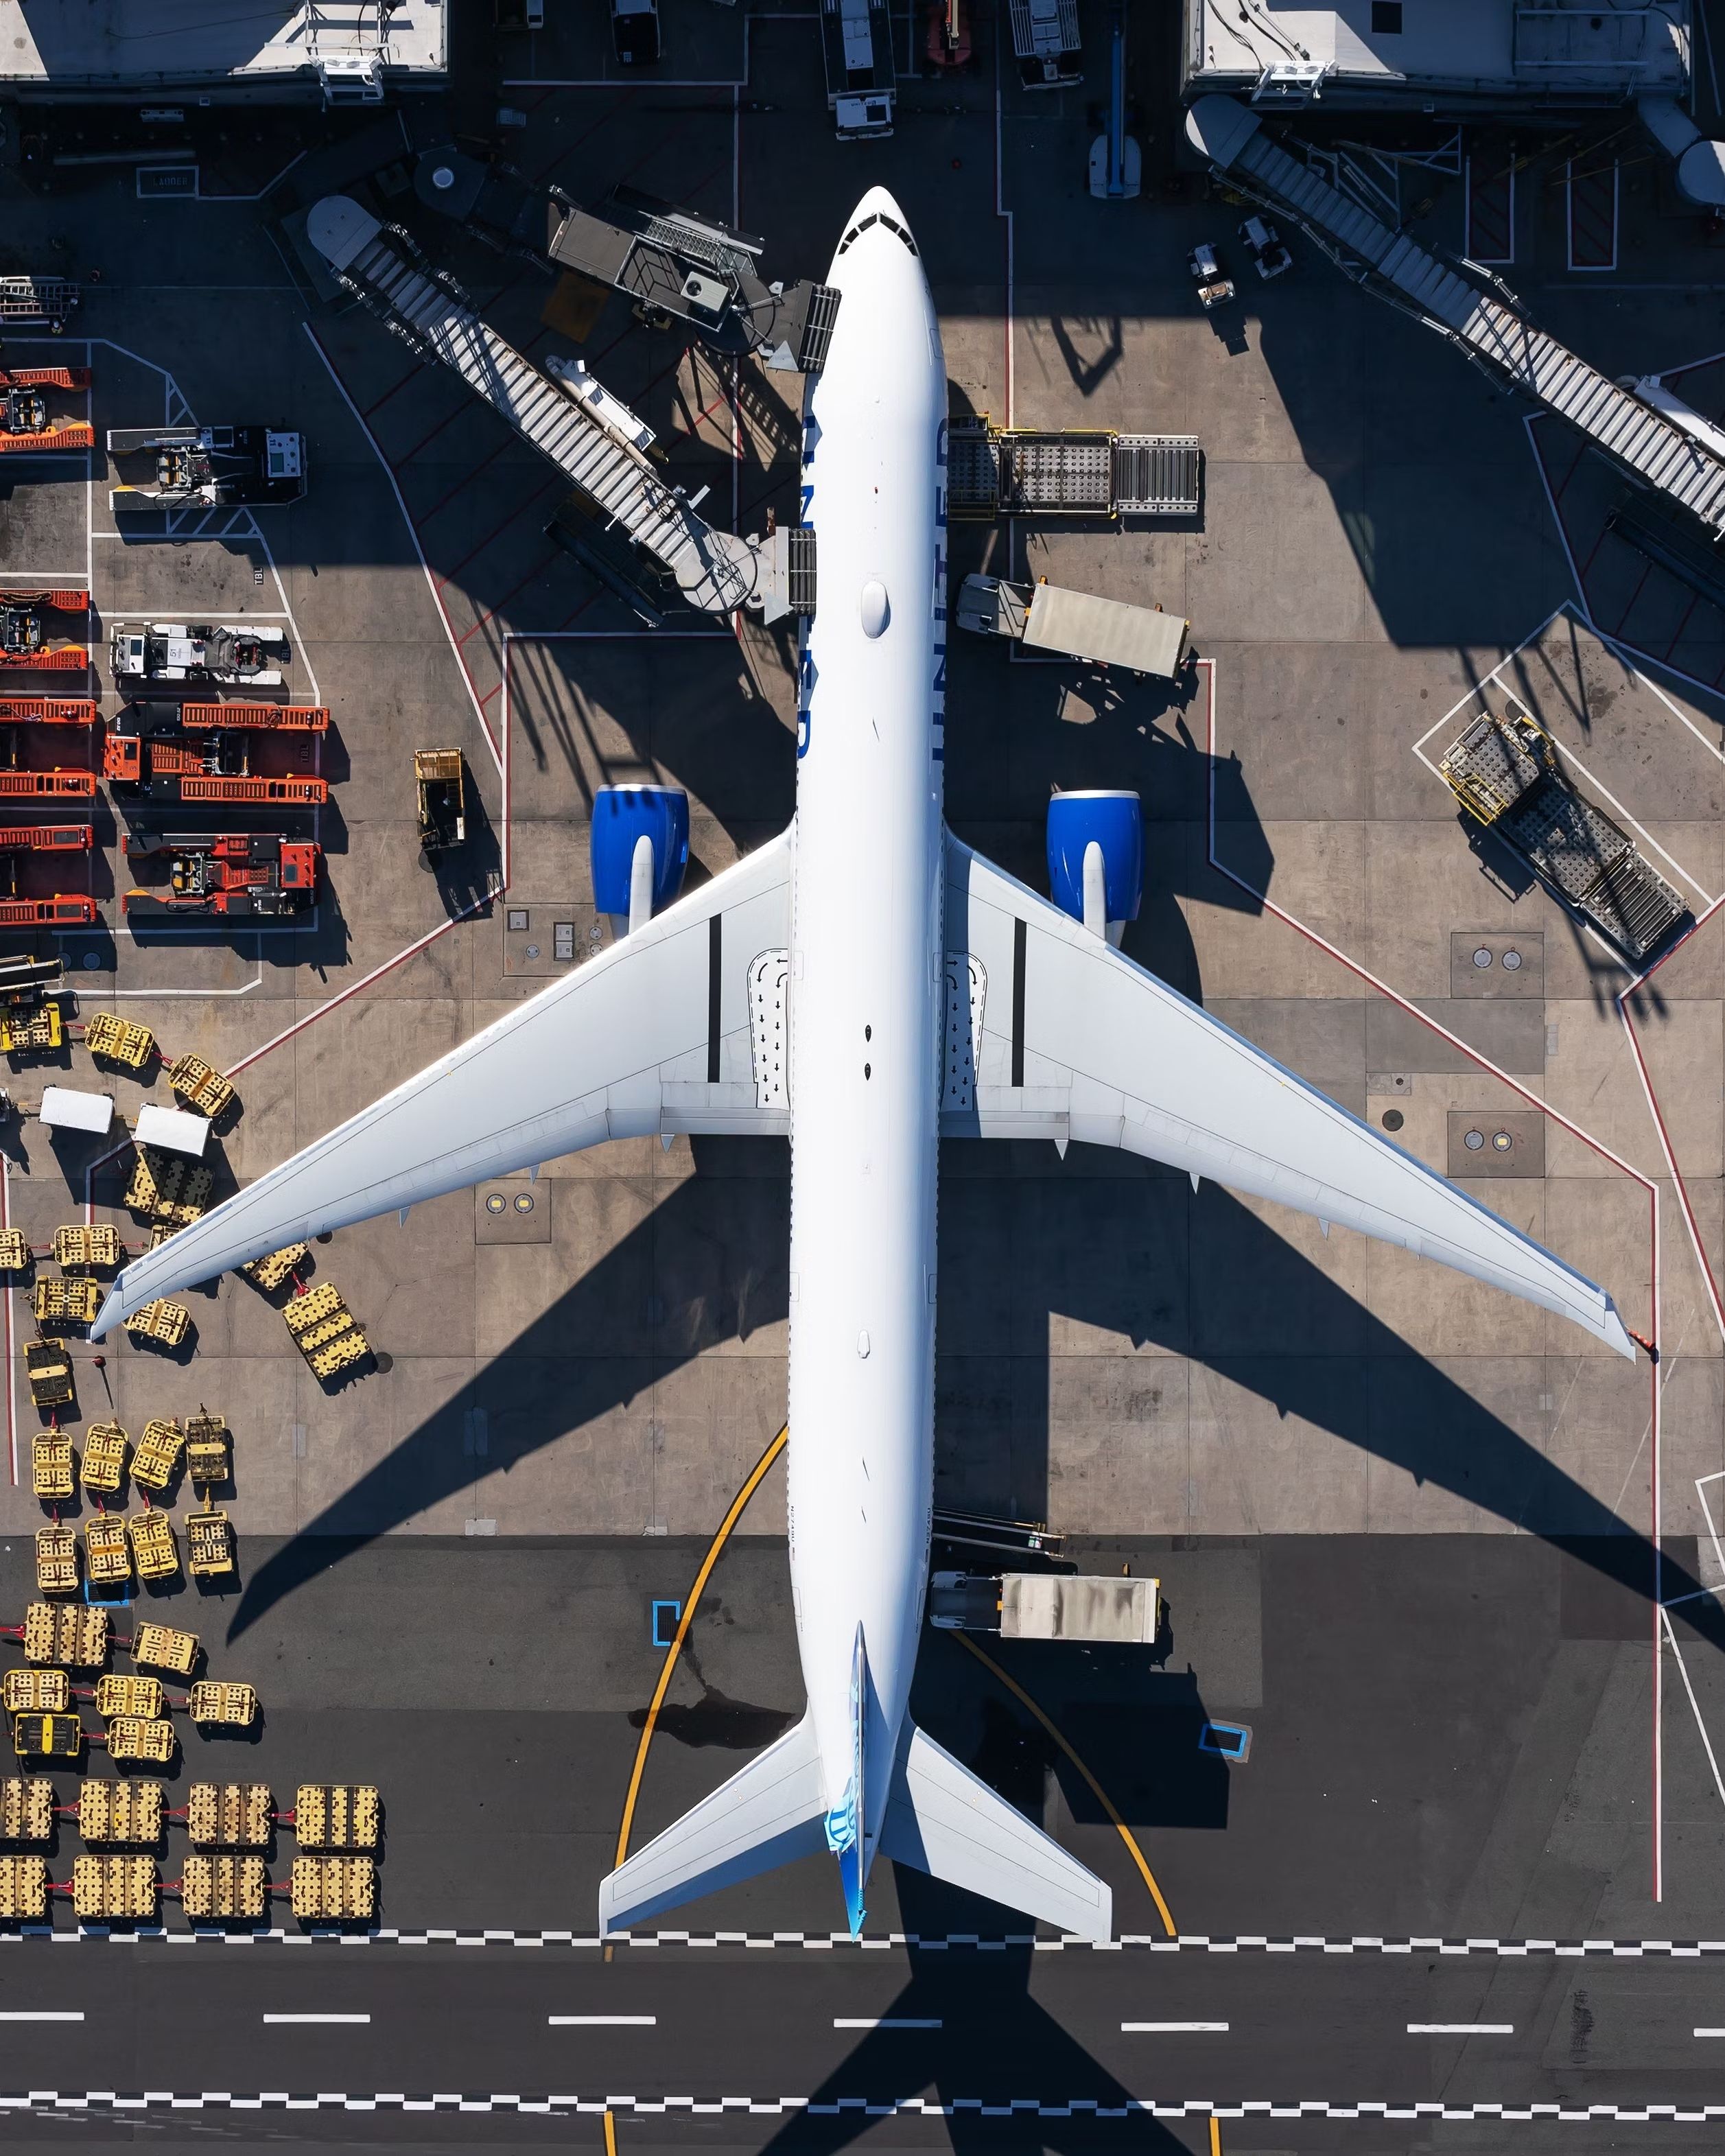 A United Airlines Boeing 777-300ER parked at a gate as seen from above.